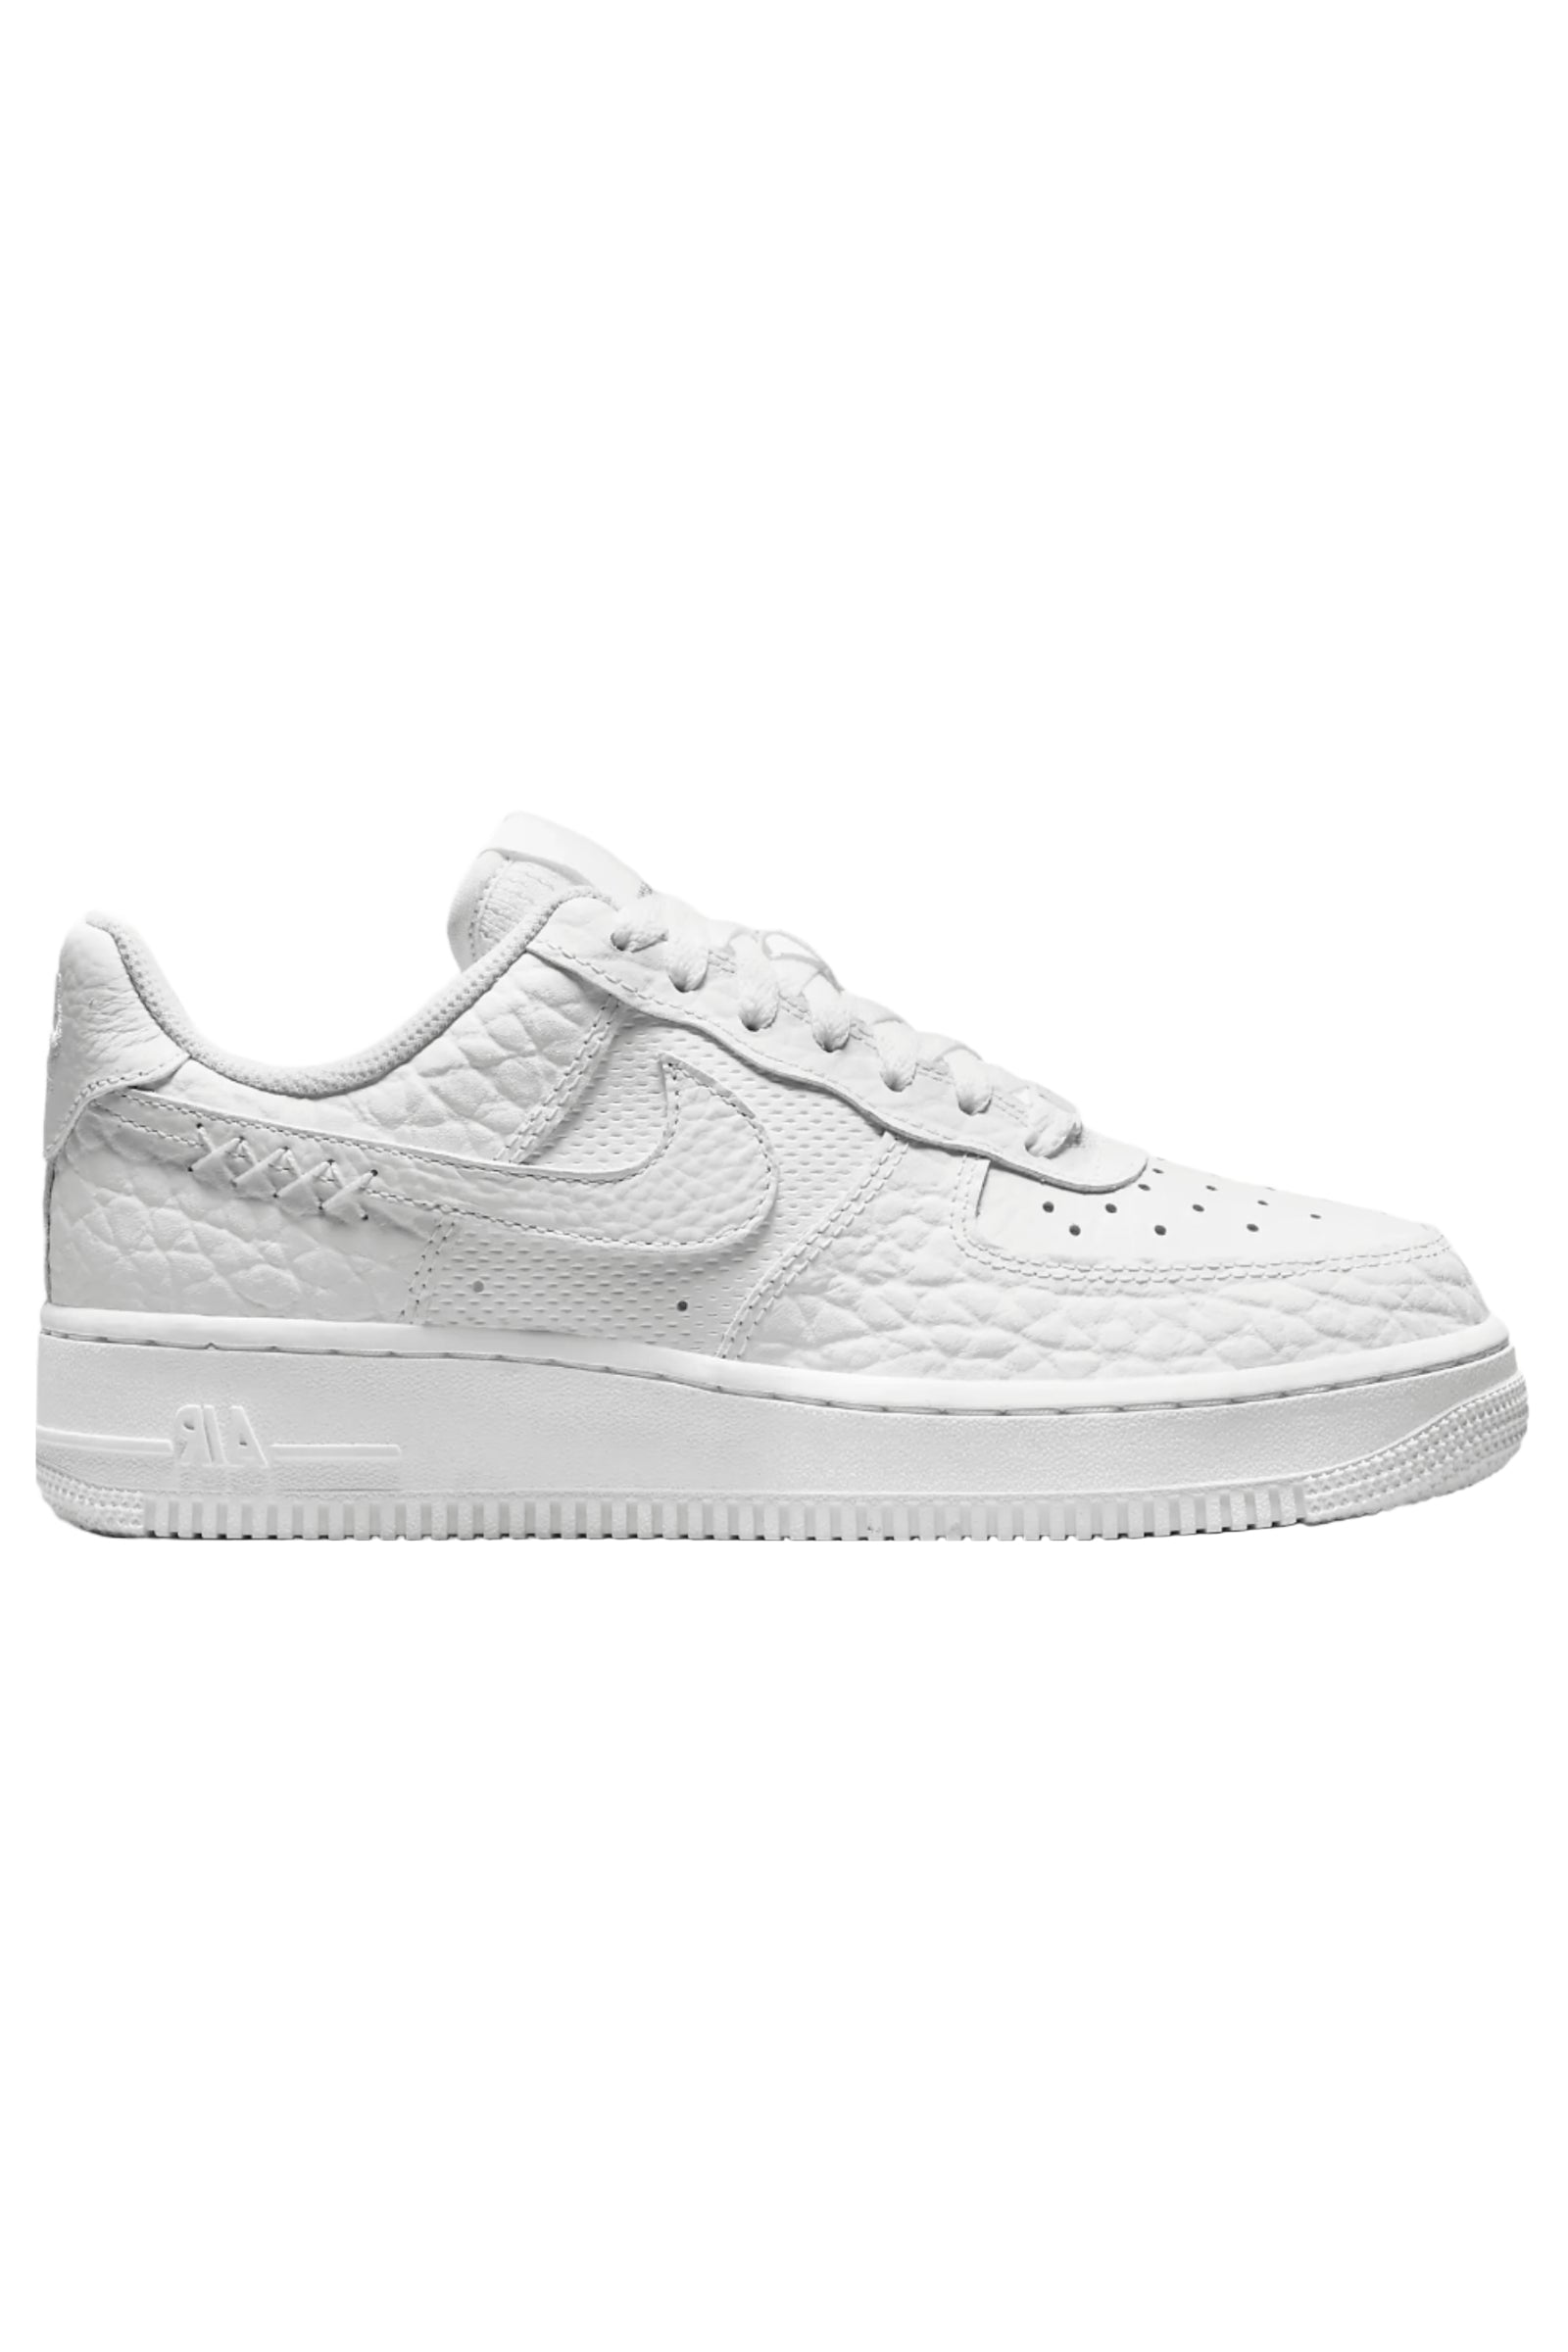 Wolf Grey Leather Dresses This Nike Air Force 1 Low